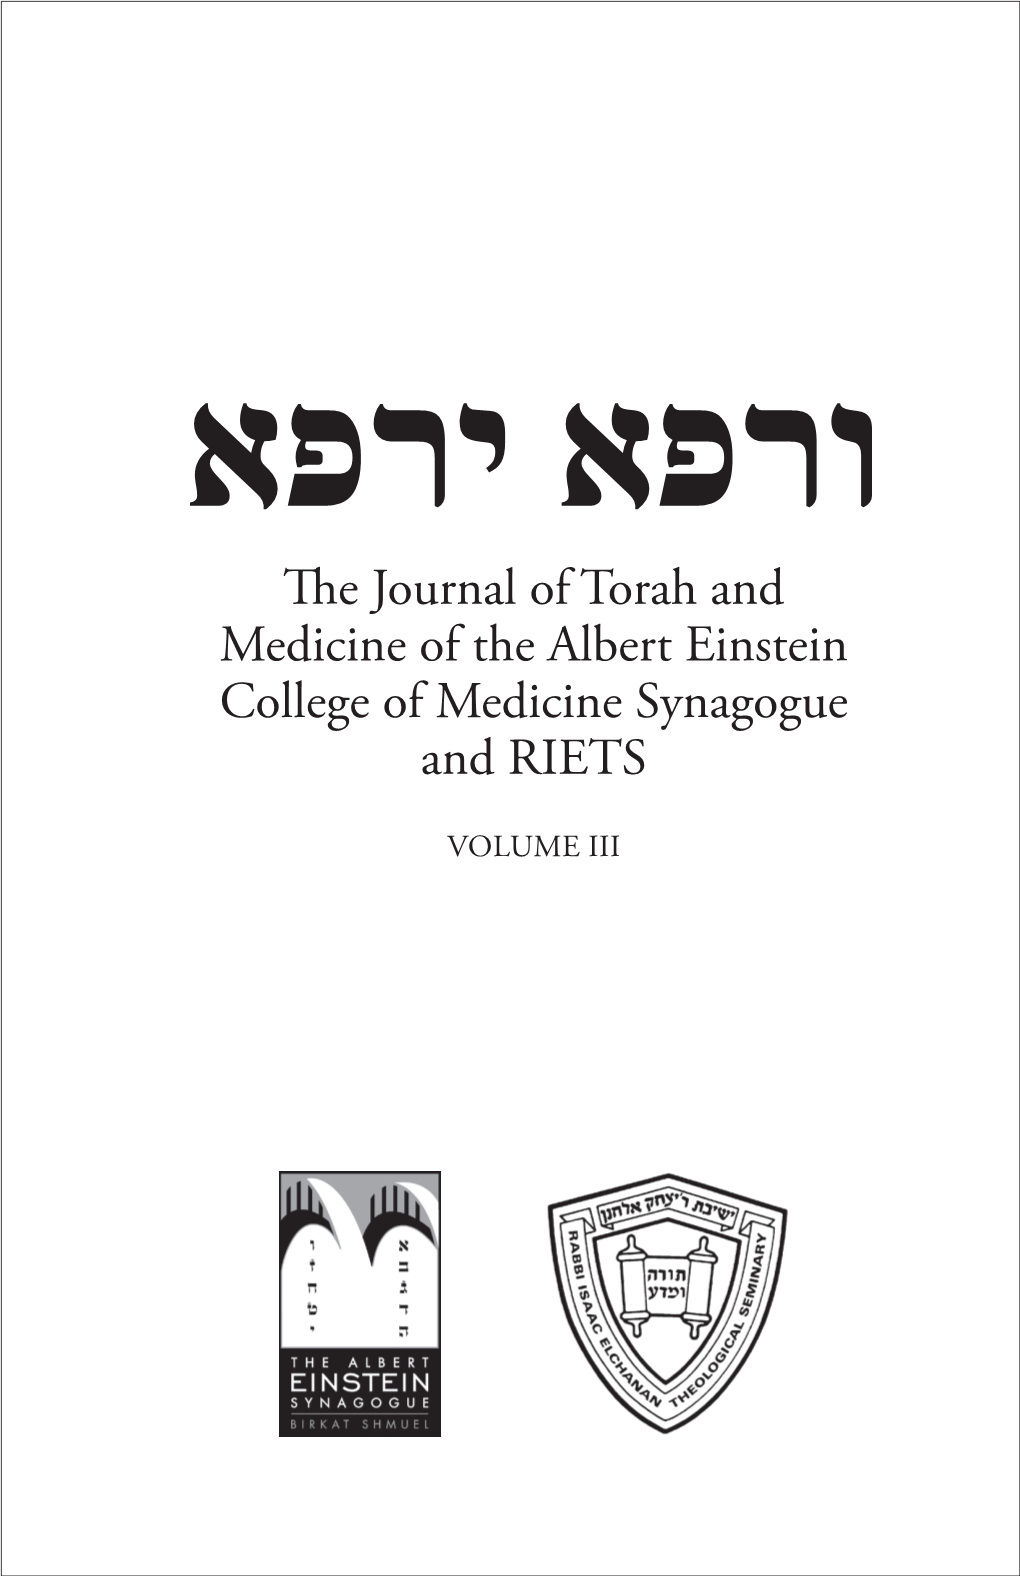 The Journal of Torah and Medicine of the Albert Einstein College of Medicine Synagogue and RIETS